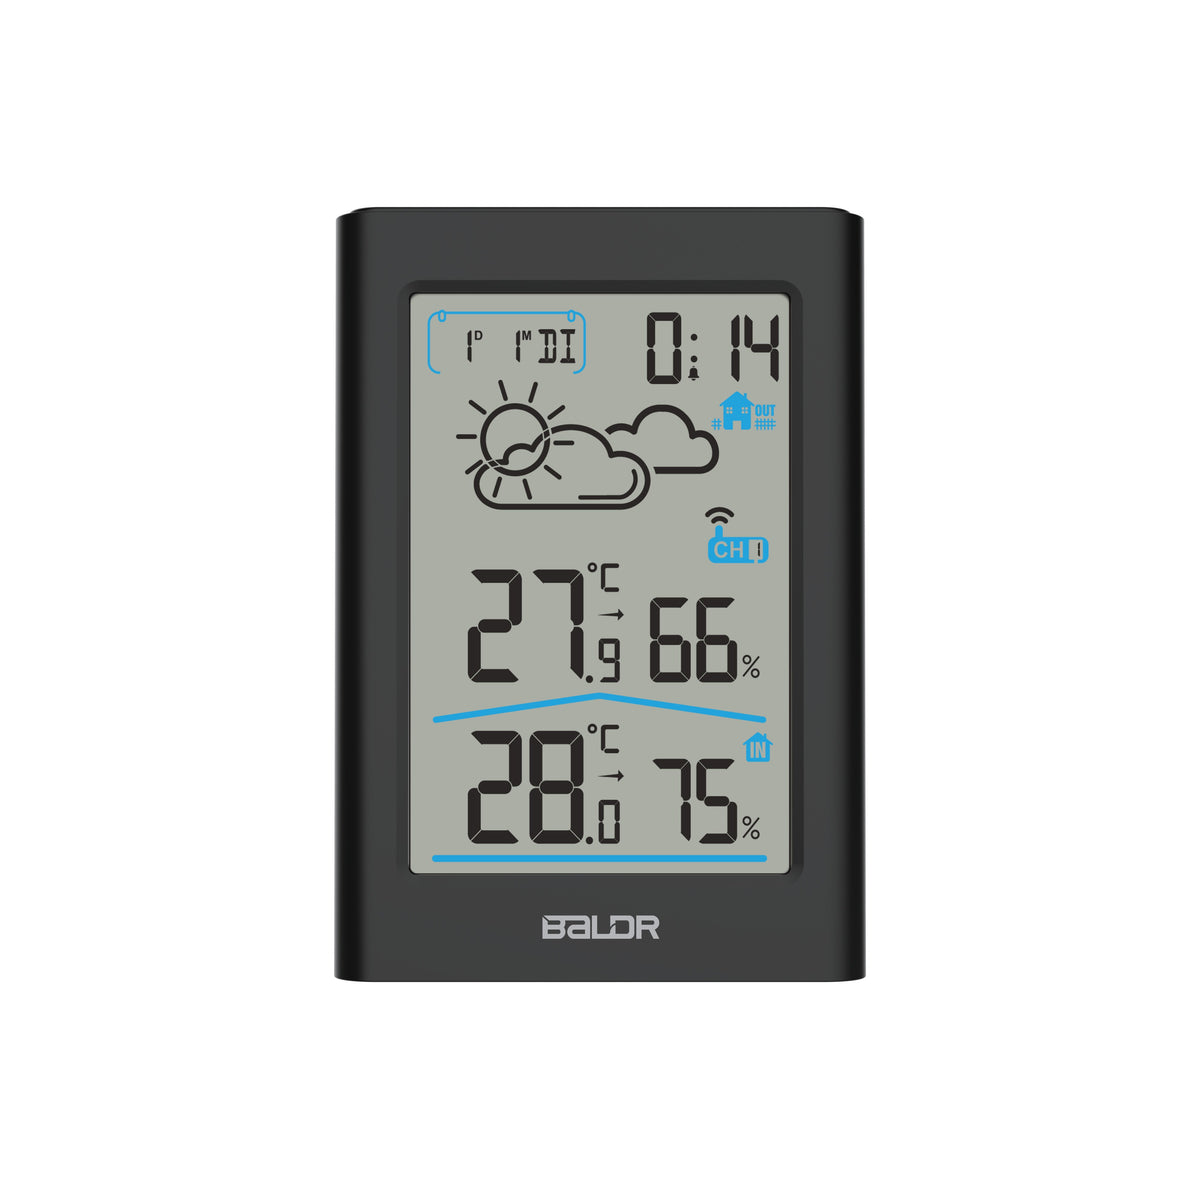 BALDR Indoor/Outdoor Thermometer/Hygrometer Wireless Weather Station 